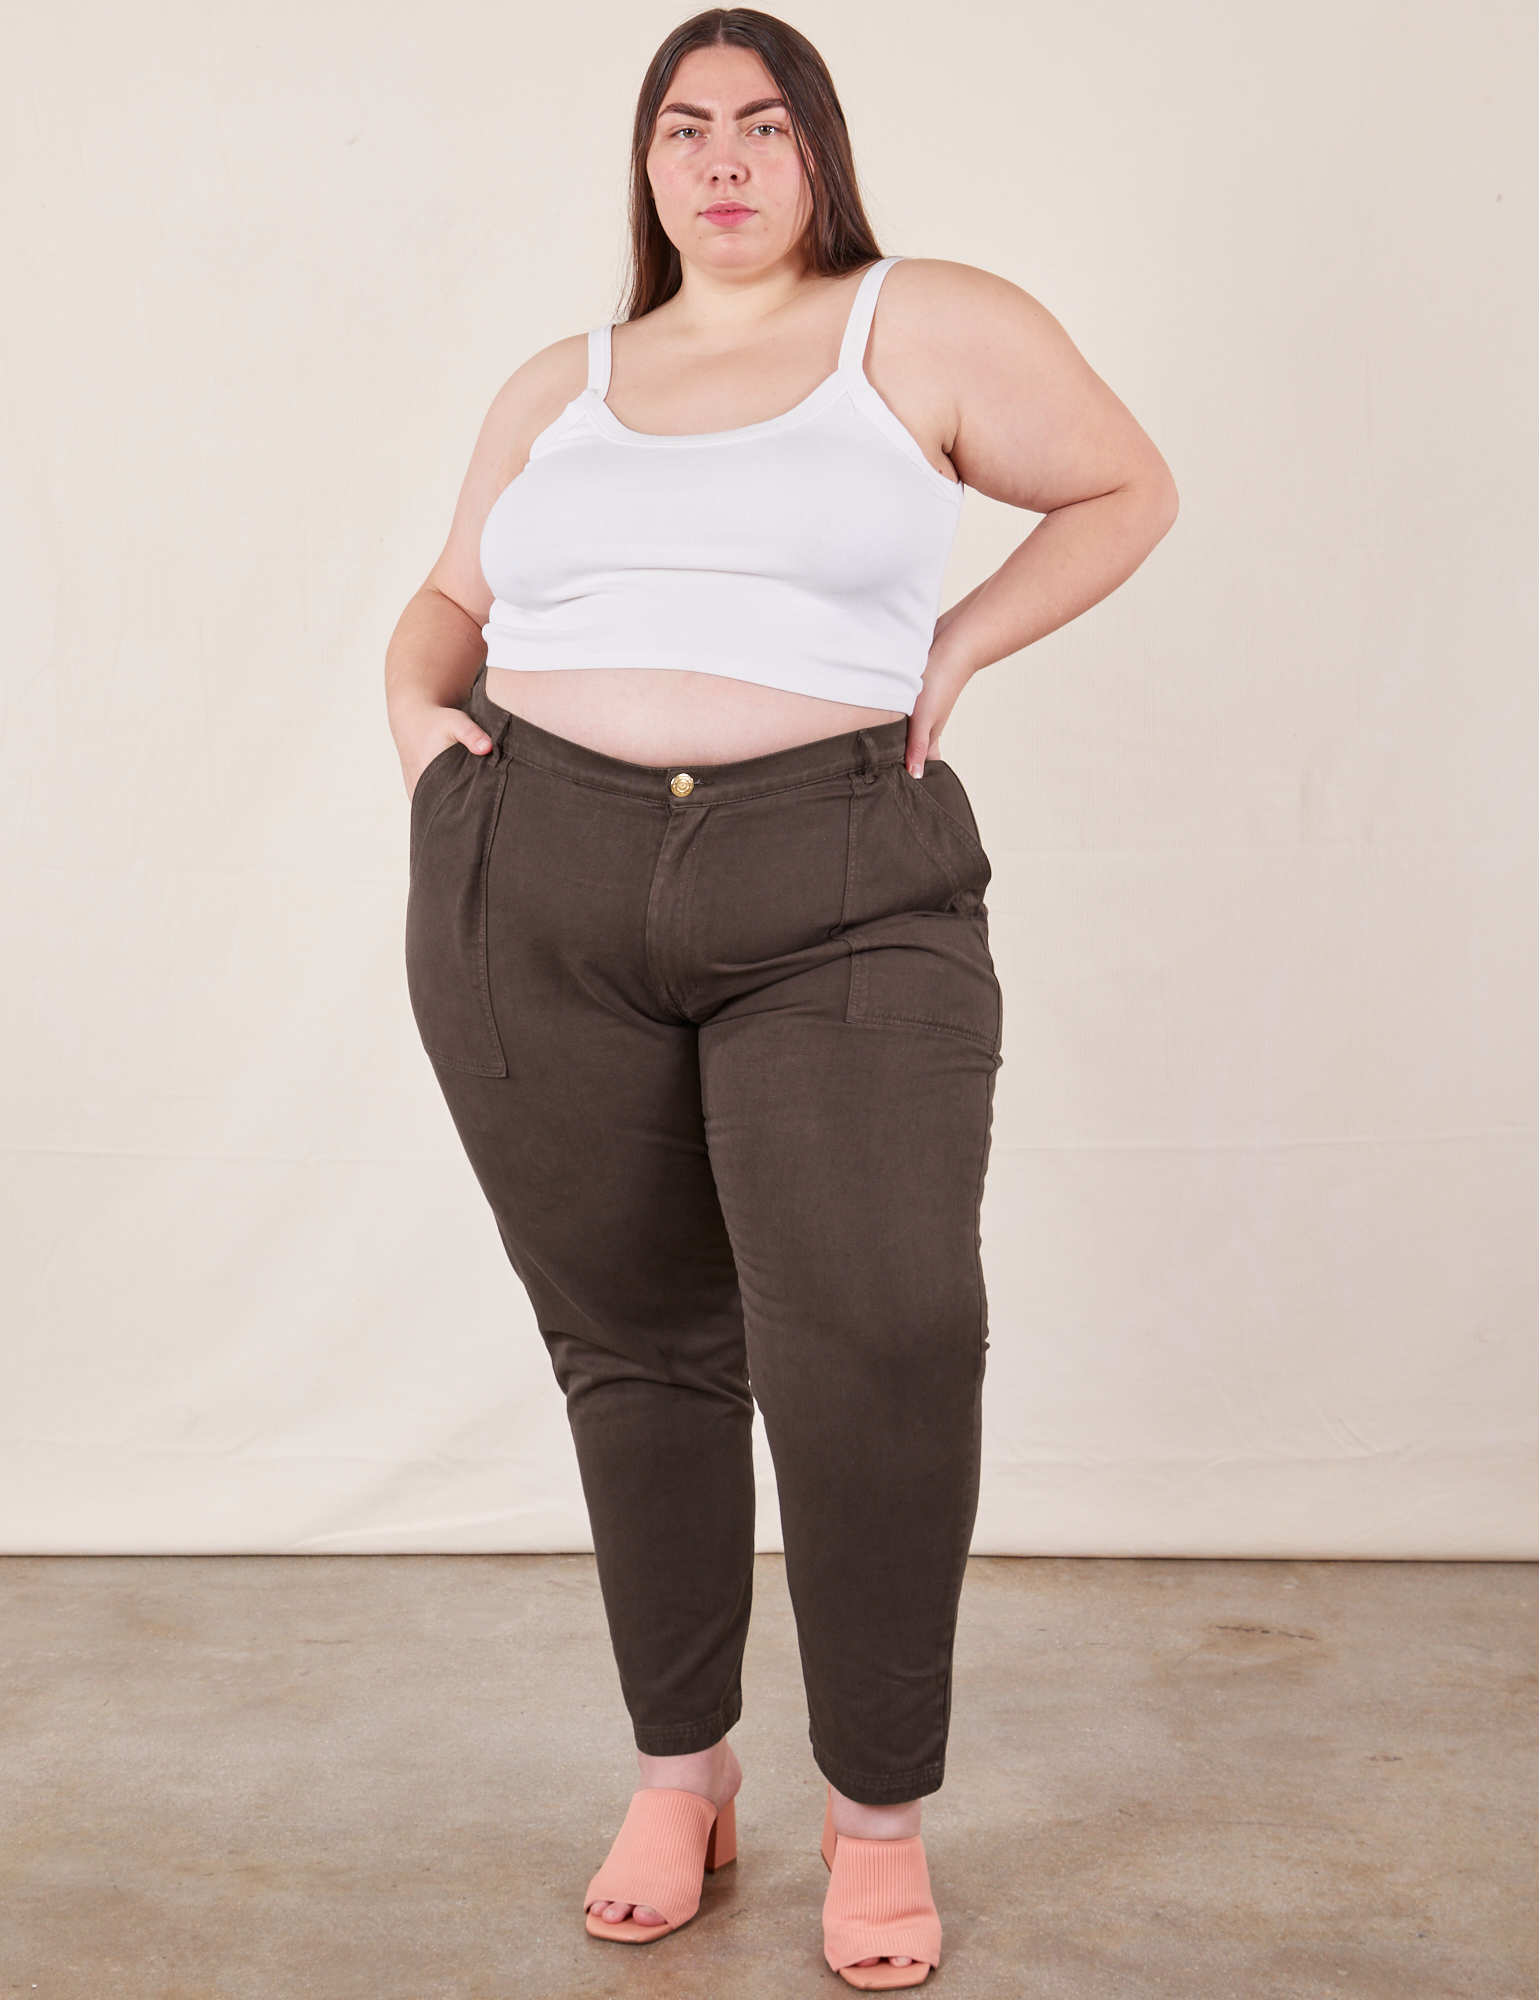 Marielena is 5&#39;8&quot; and wearing 2XL Pencil Pants in Espresso Brown vintage off-white Cami